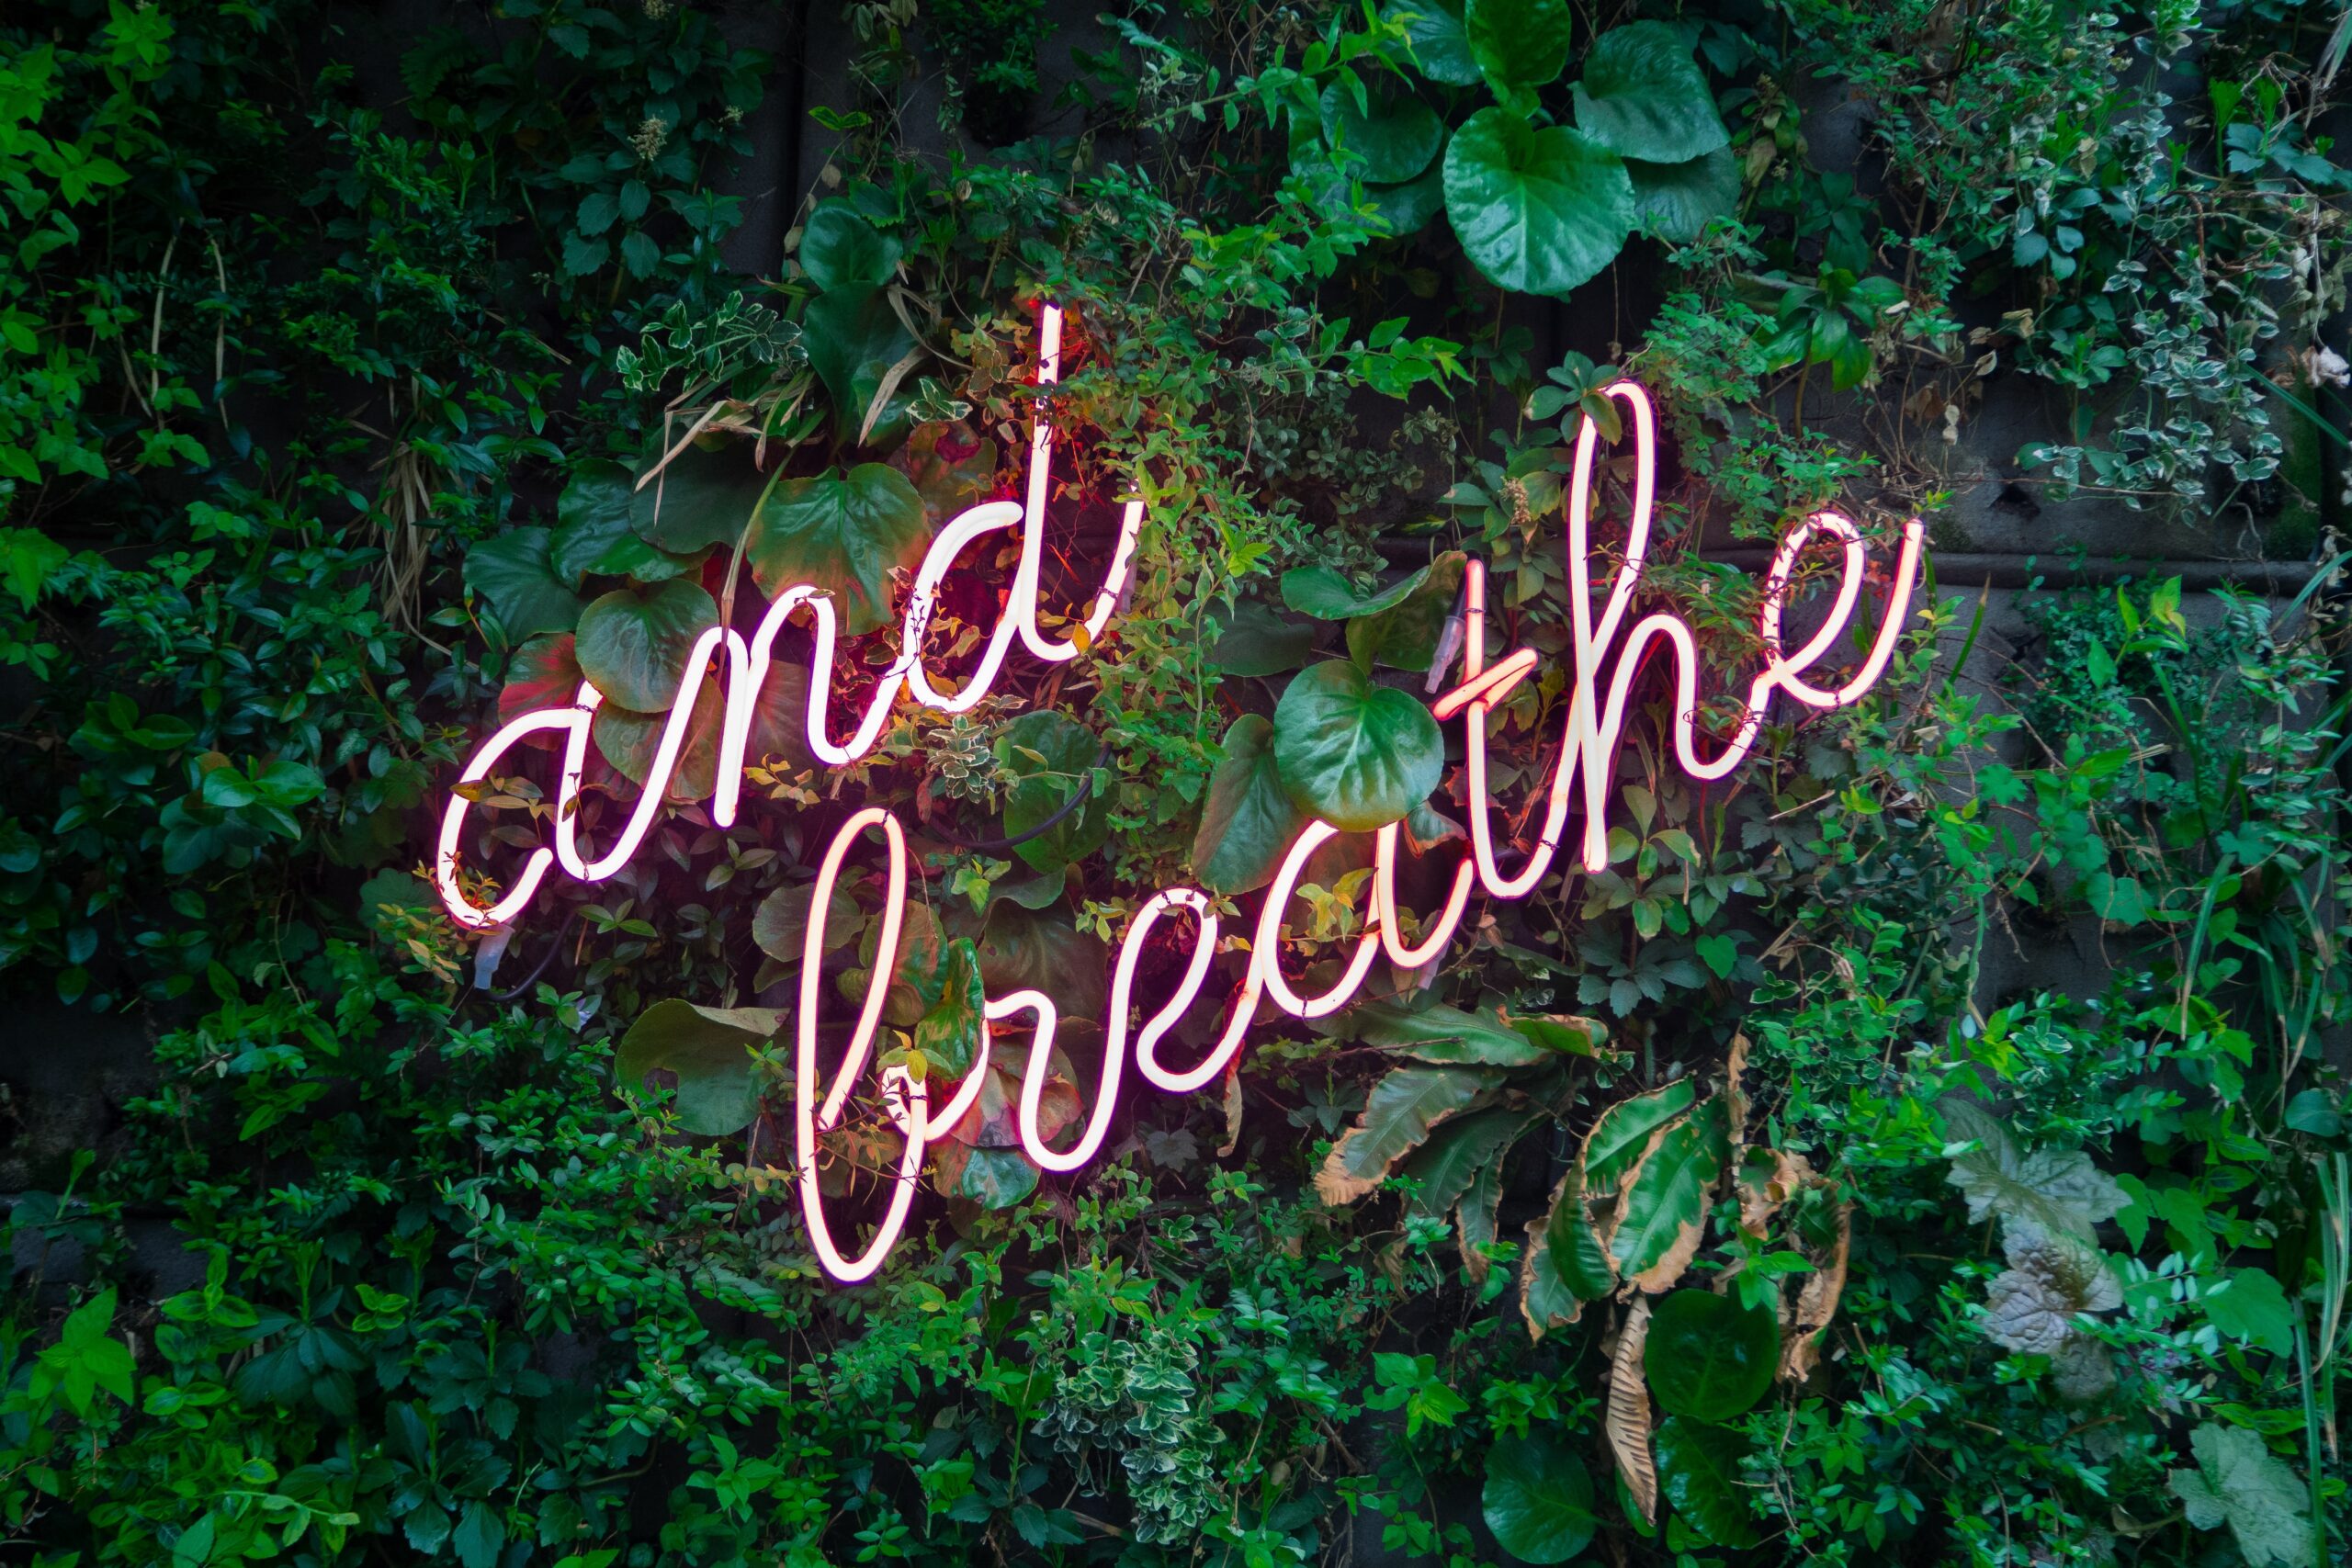 Photo of a neon sign that says "and breathe" against foliage.